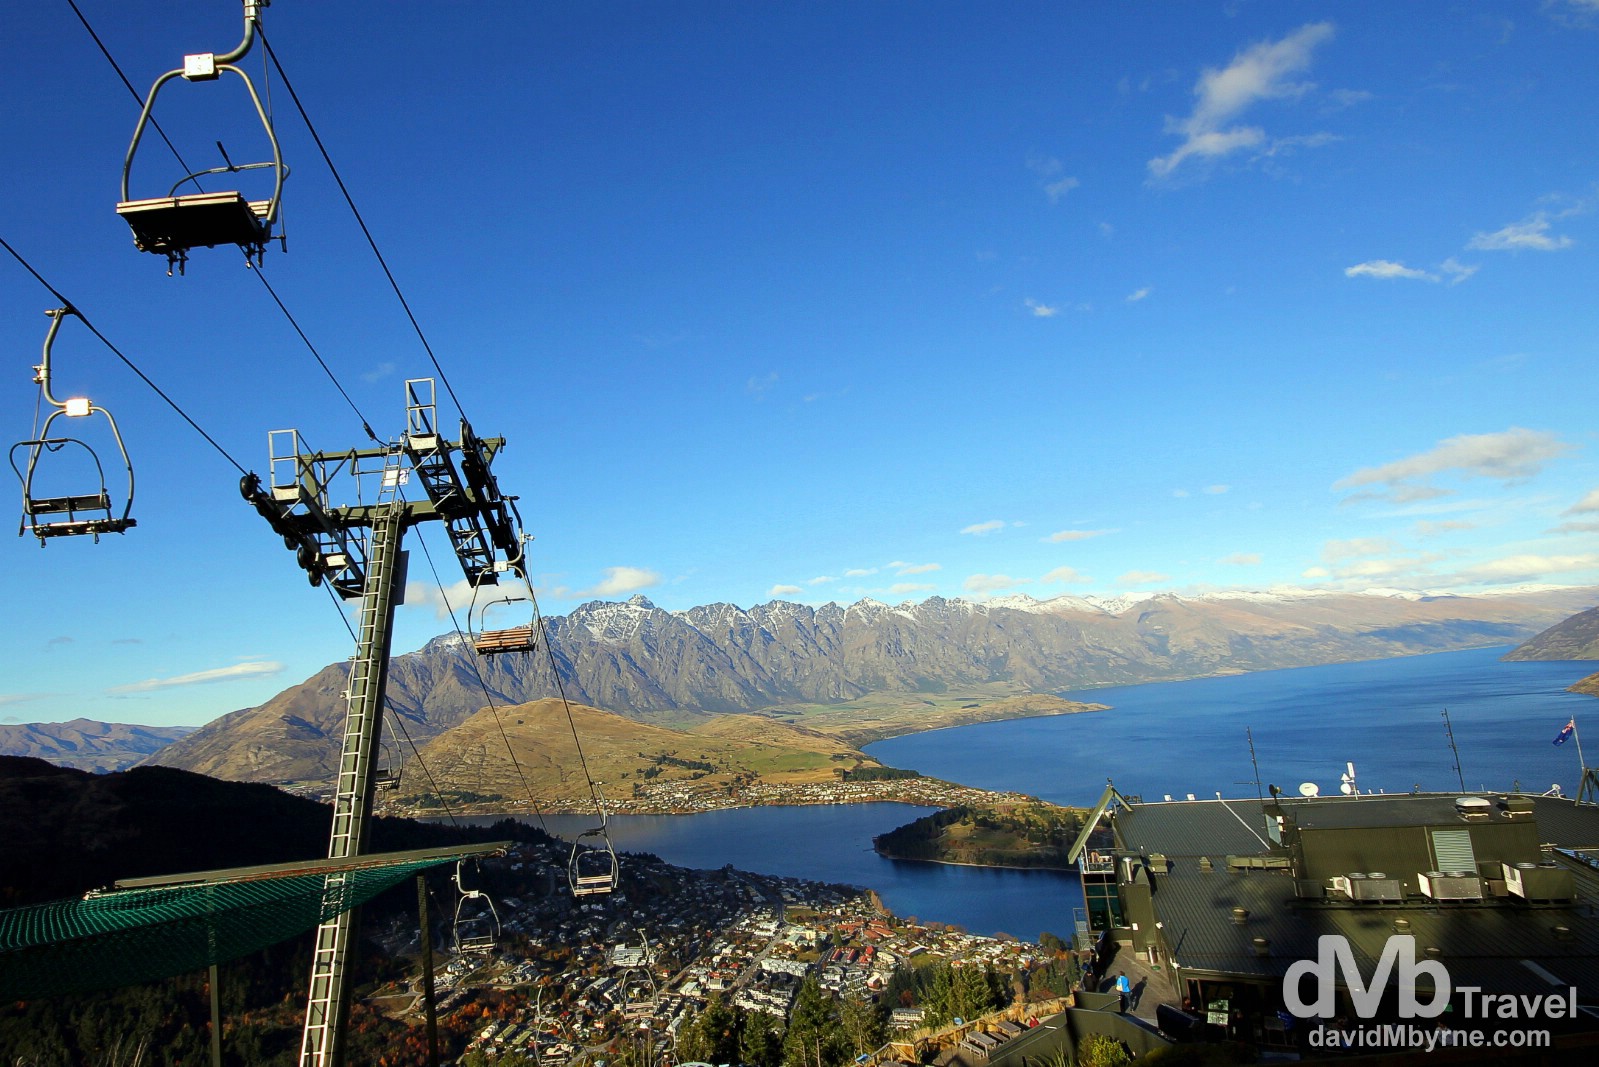 The Remarkables mountain range & Lake Wakatipu as seen from Bob’s Peak overlooking Queenstown, South Island, New Zealand. May 23rd 2012.